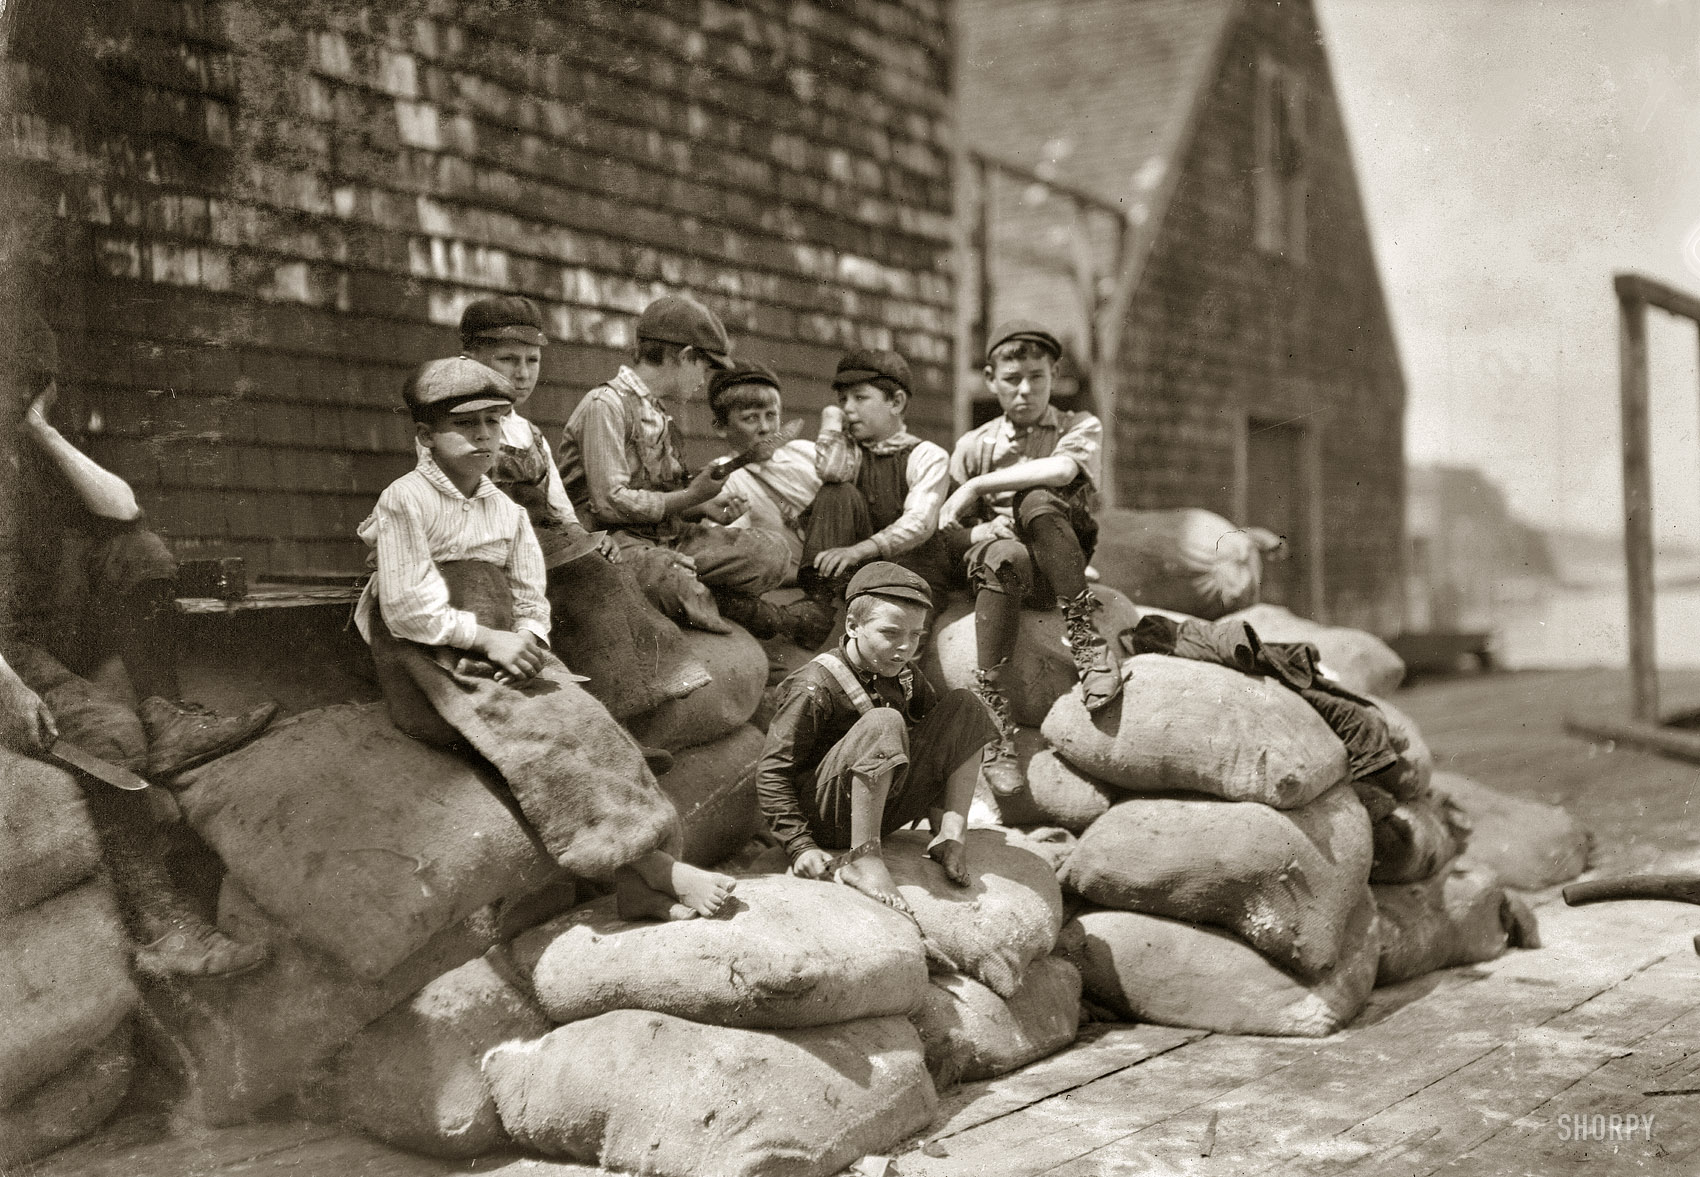 August 1911. Eastport, Maine. "Group of young cutters, Seacoast Canning Co., Factory #2, waiting for more fish. They all work, but they waste a great deal of time, as the adults do also, waiting for fish to arrive." Anyone up for a quick knife fight? Photograph and caption by Lewis Wickes Hine. View full size.